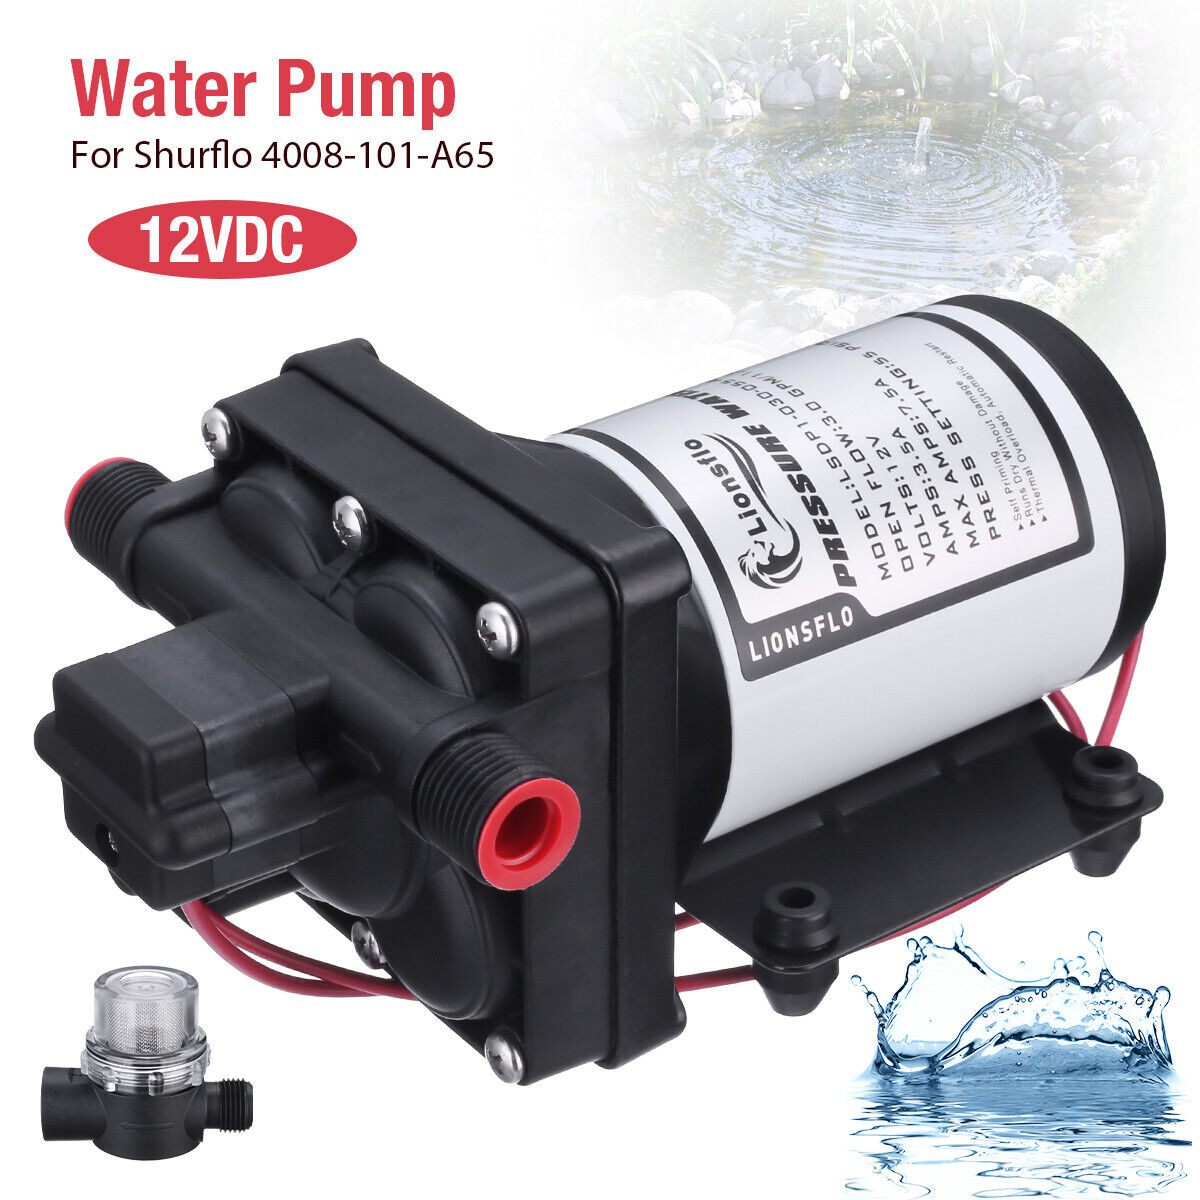 RV Marine Water Pump 12V 3.0 Gpm with Strainer For Shurflo 4008-101-A65 Camper